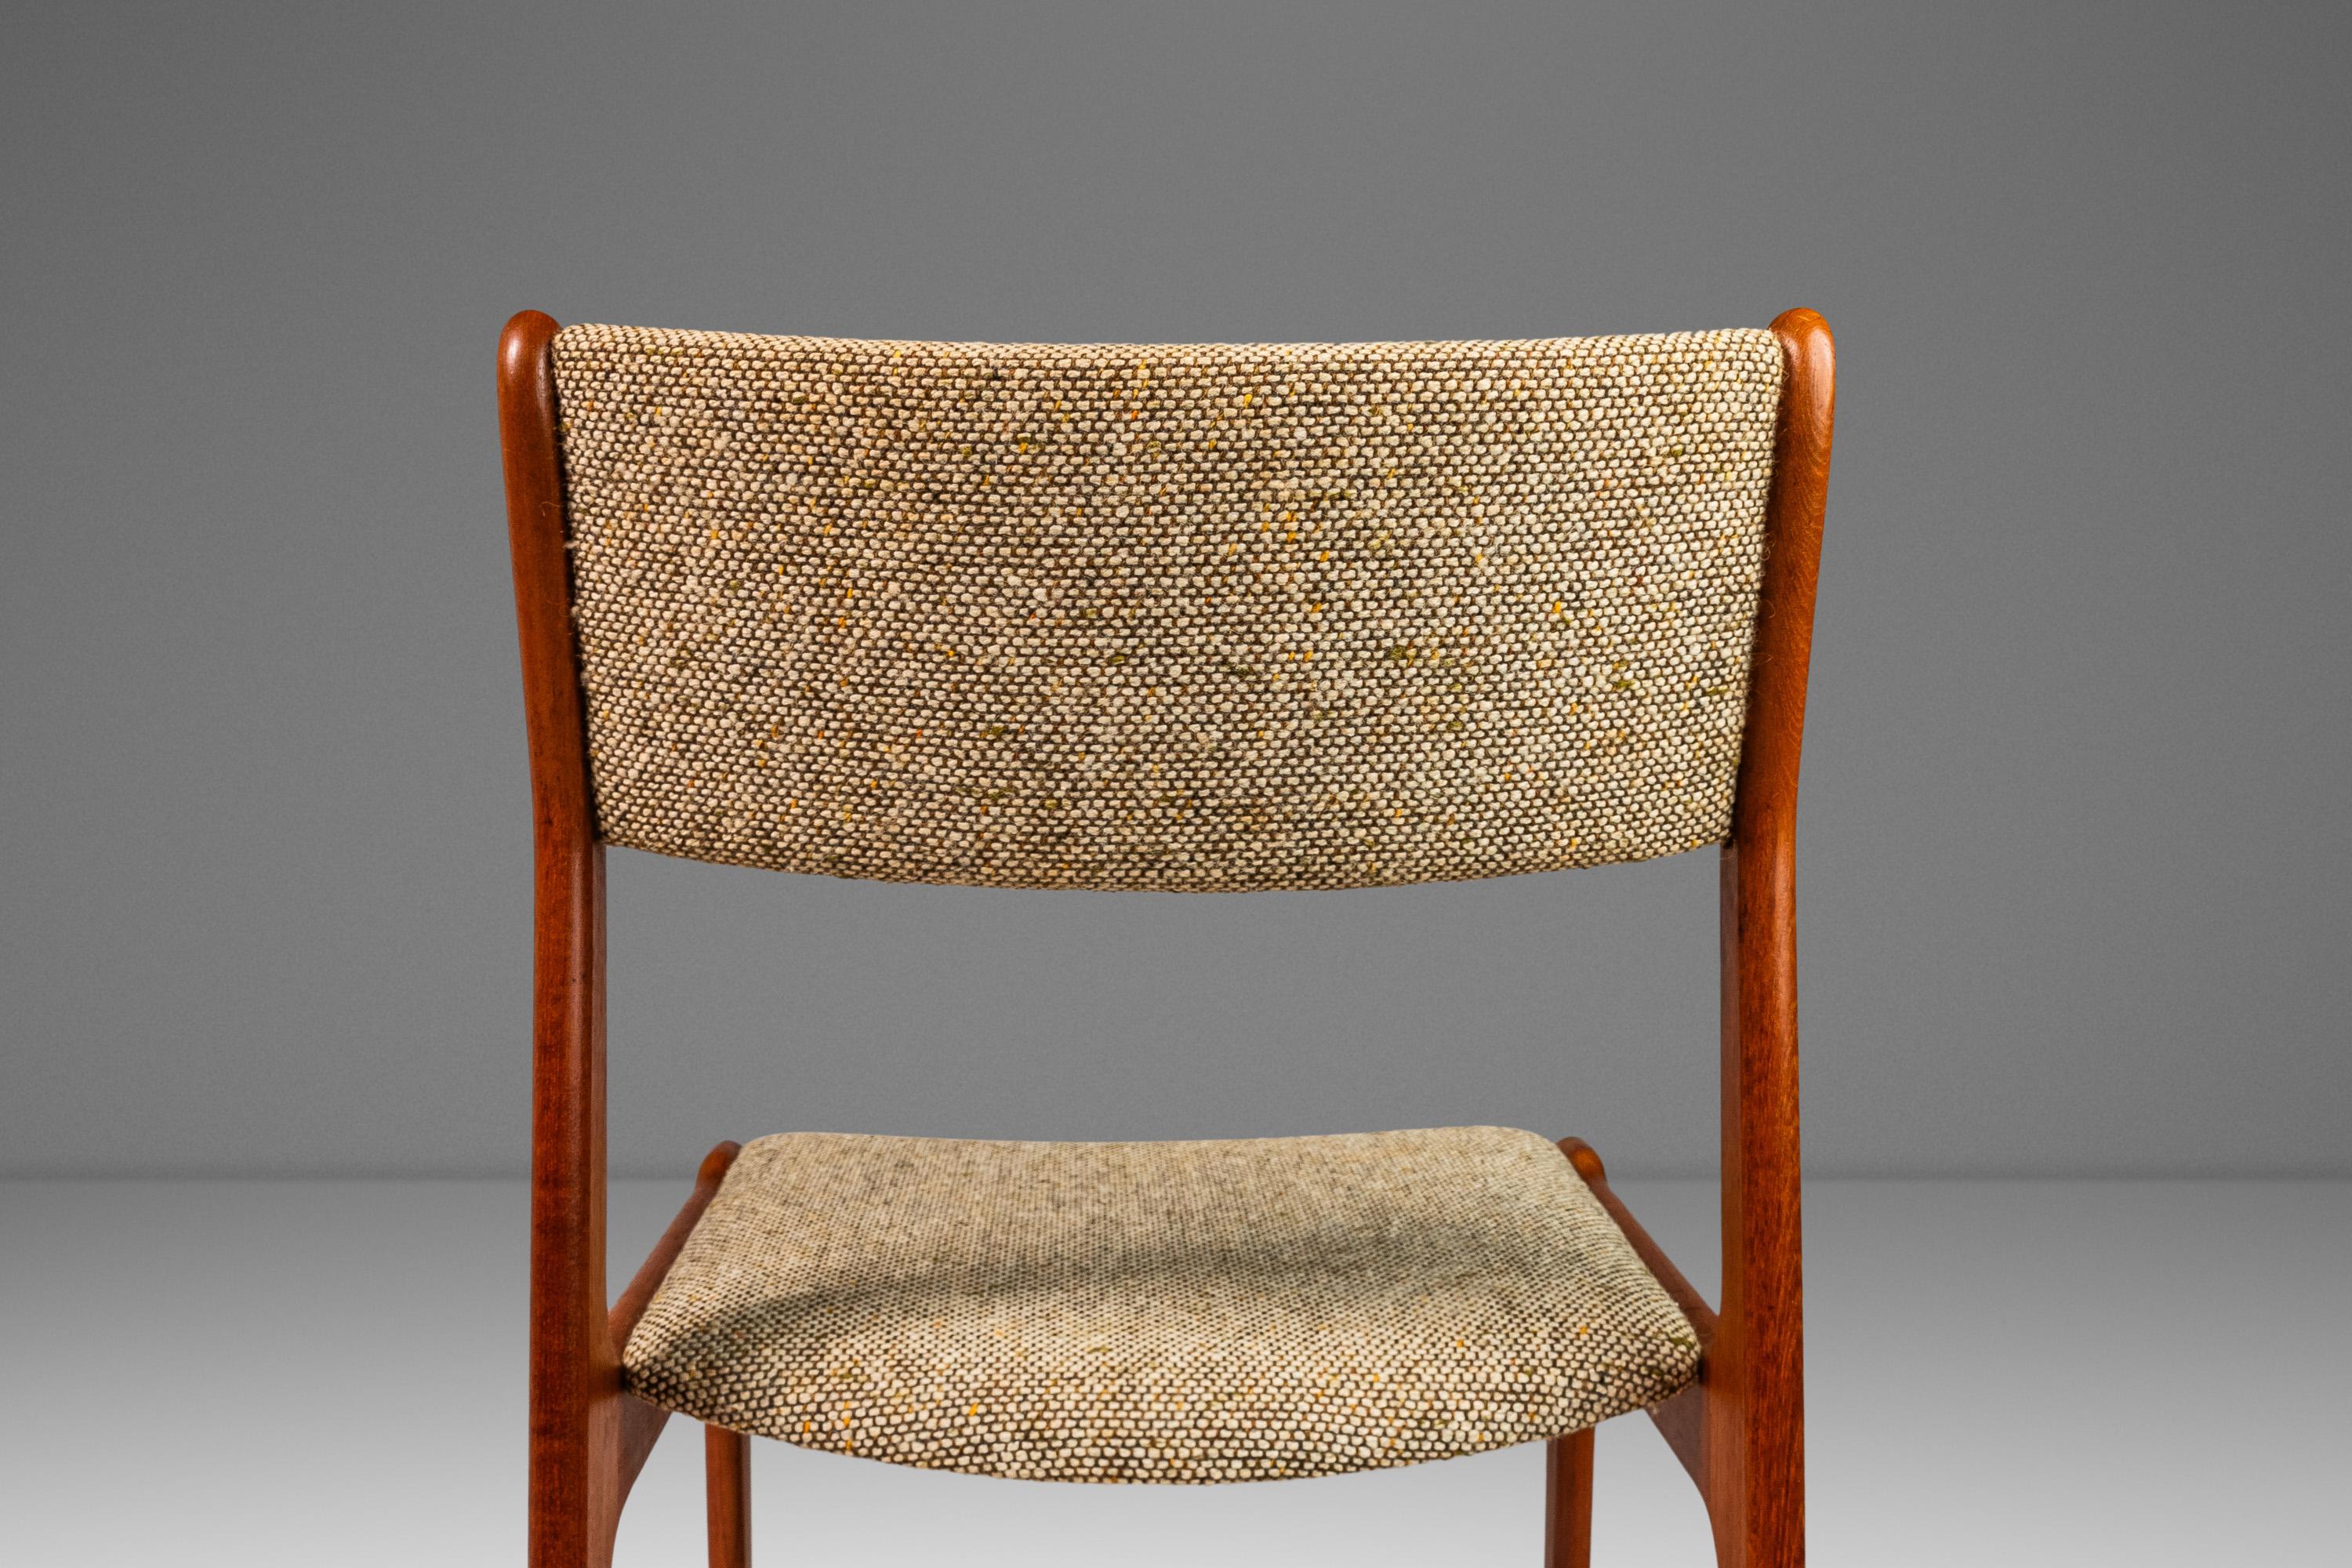 Set of 4 Danish Teak Dining Chairs by D-SCAN, Original Fabric, c. 1970s For Sale 6